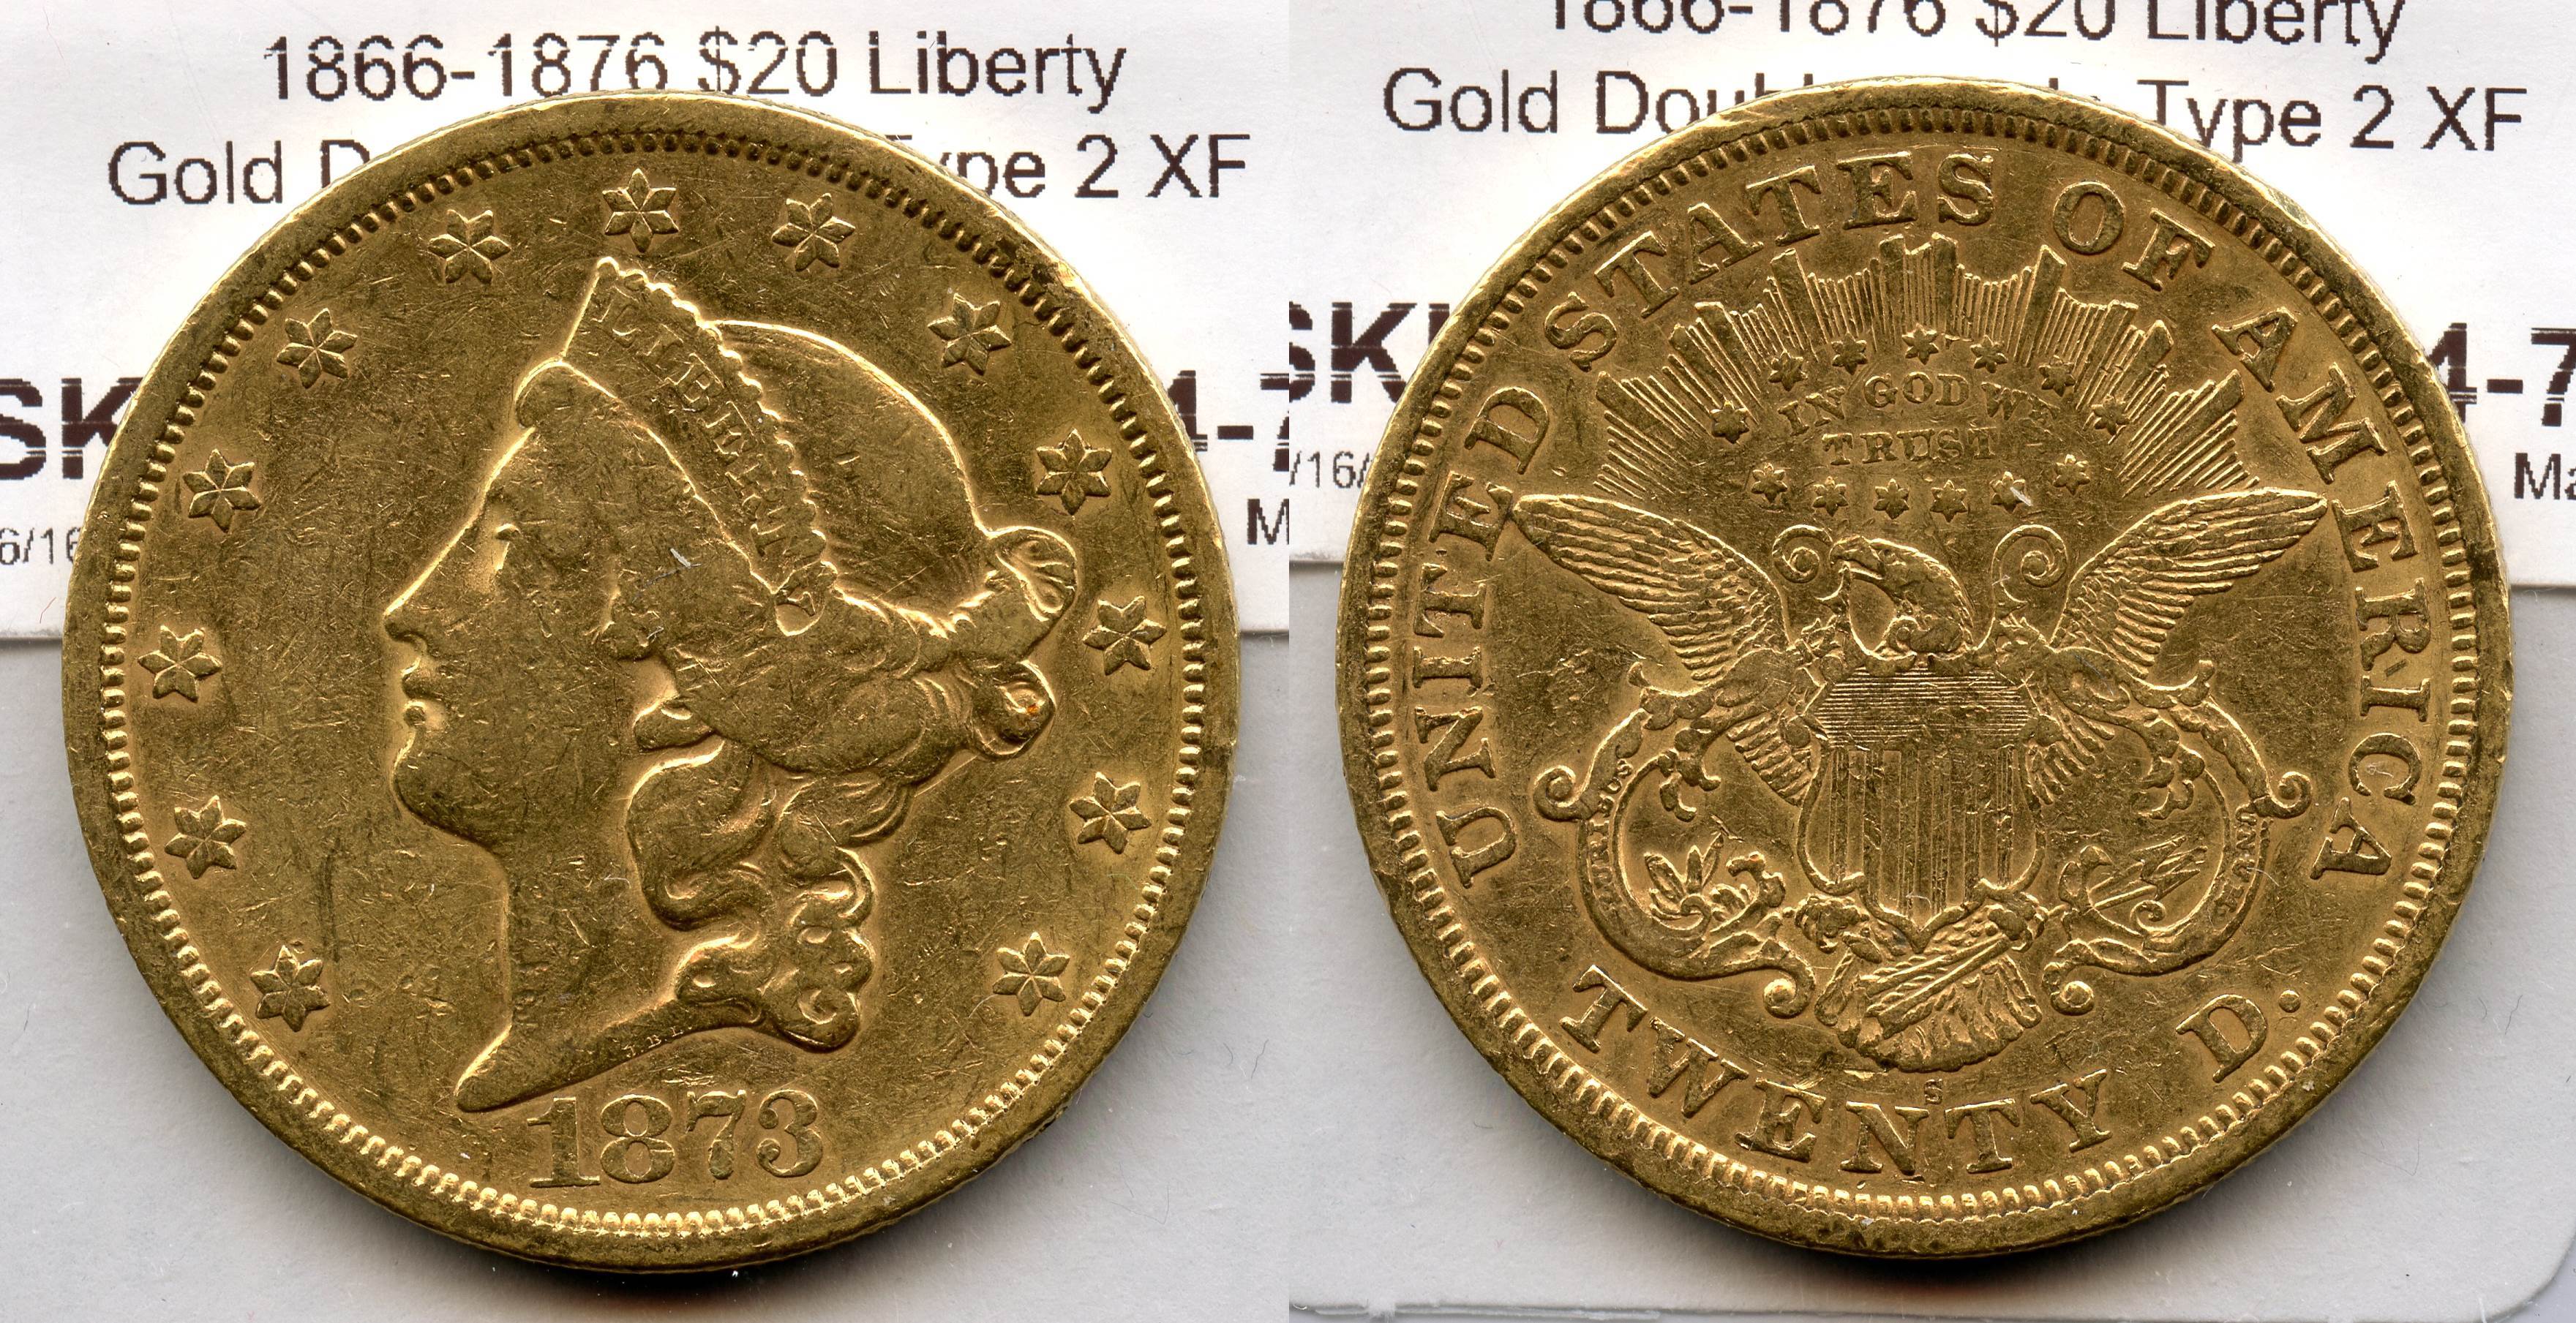 1873-S Closed 3 Liberty Head $20.00 Gold Double Eagle EF-40 large